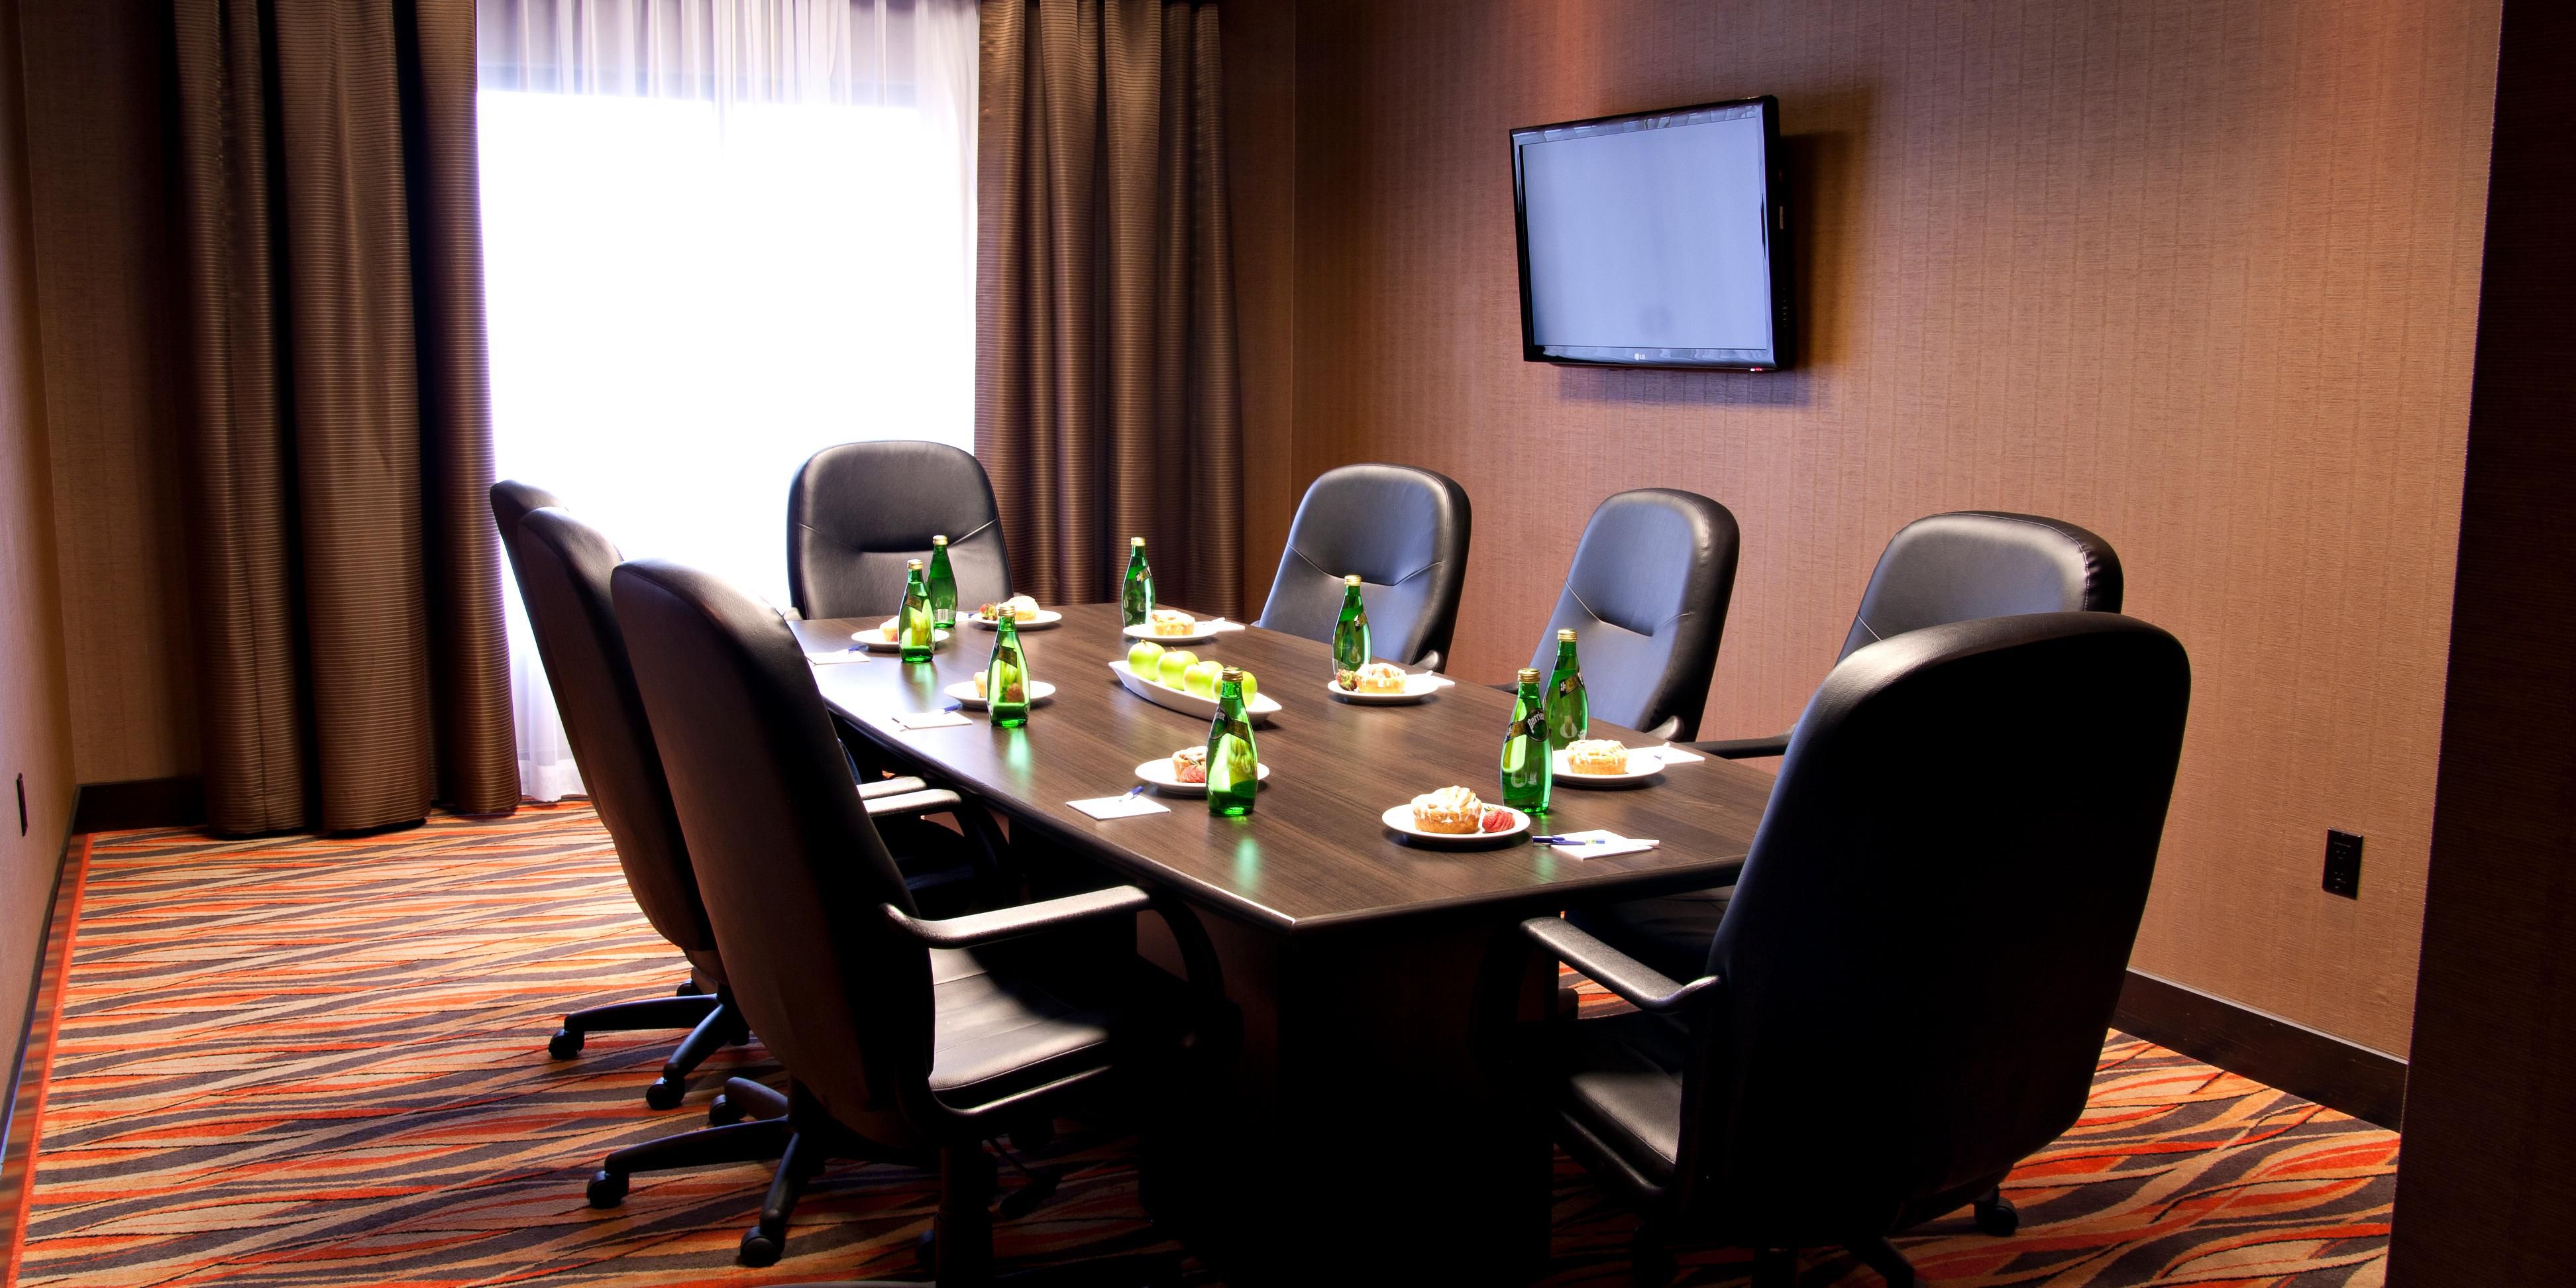 Enjoy Boardroom facilities for up to 10 people. Catering options are available. 